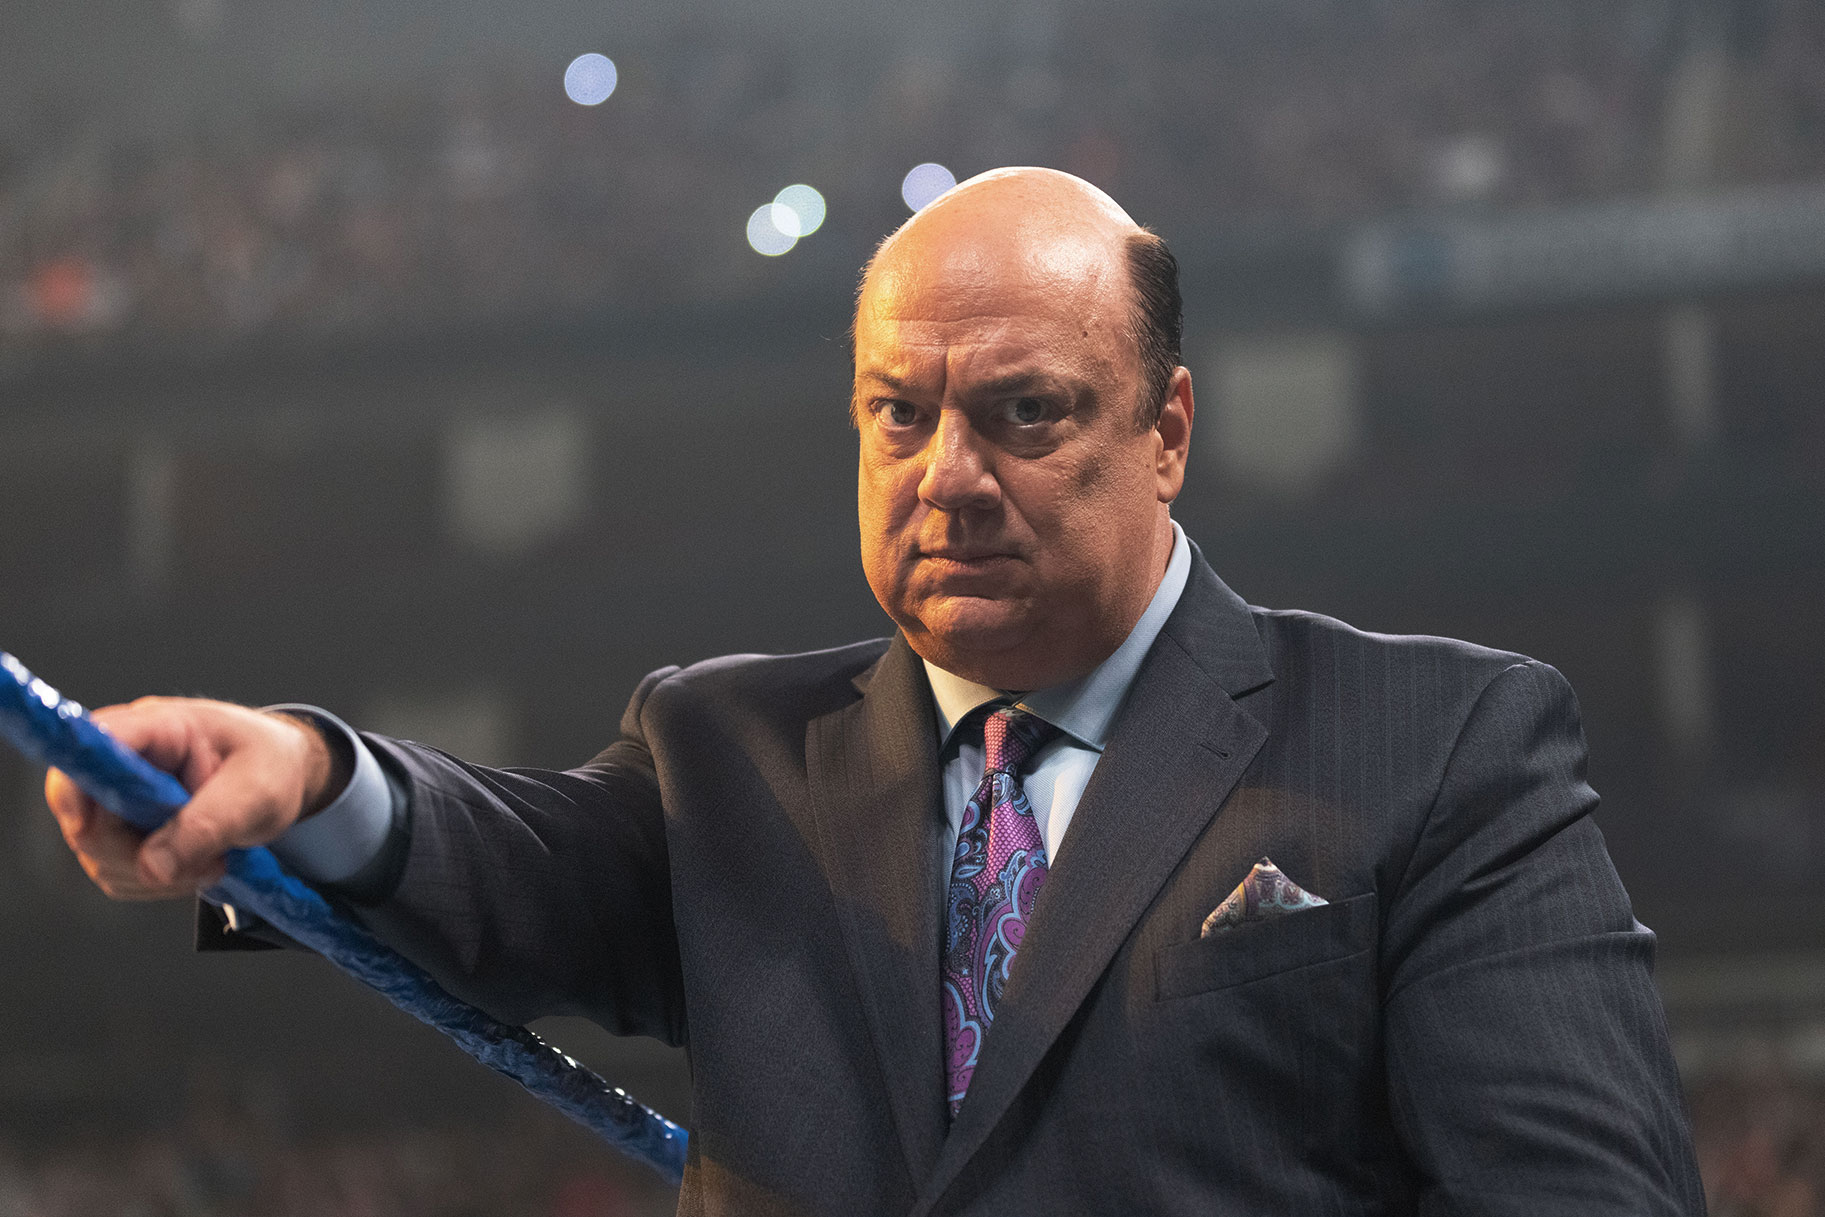 Paul Heyman looking into the camera with a stern look on his face